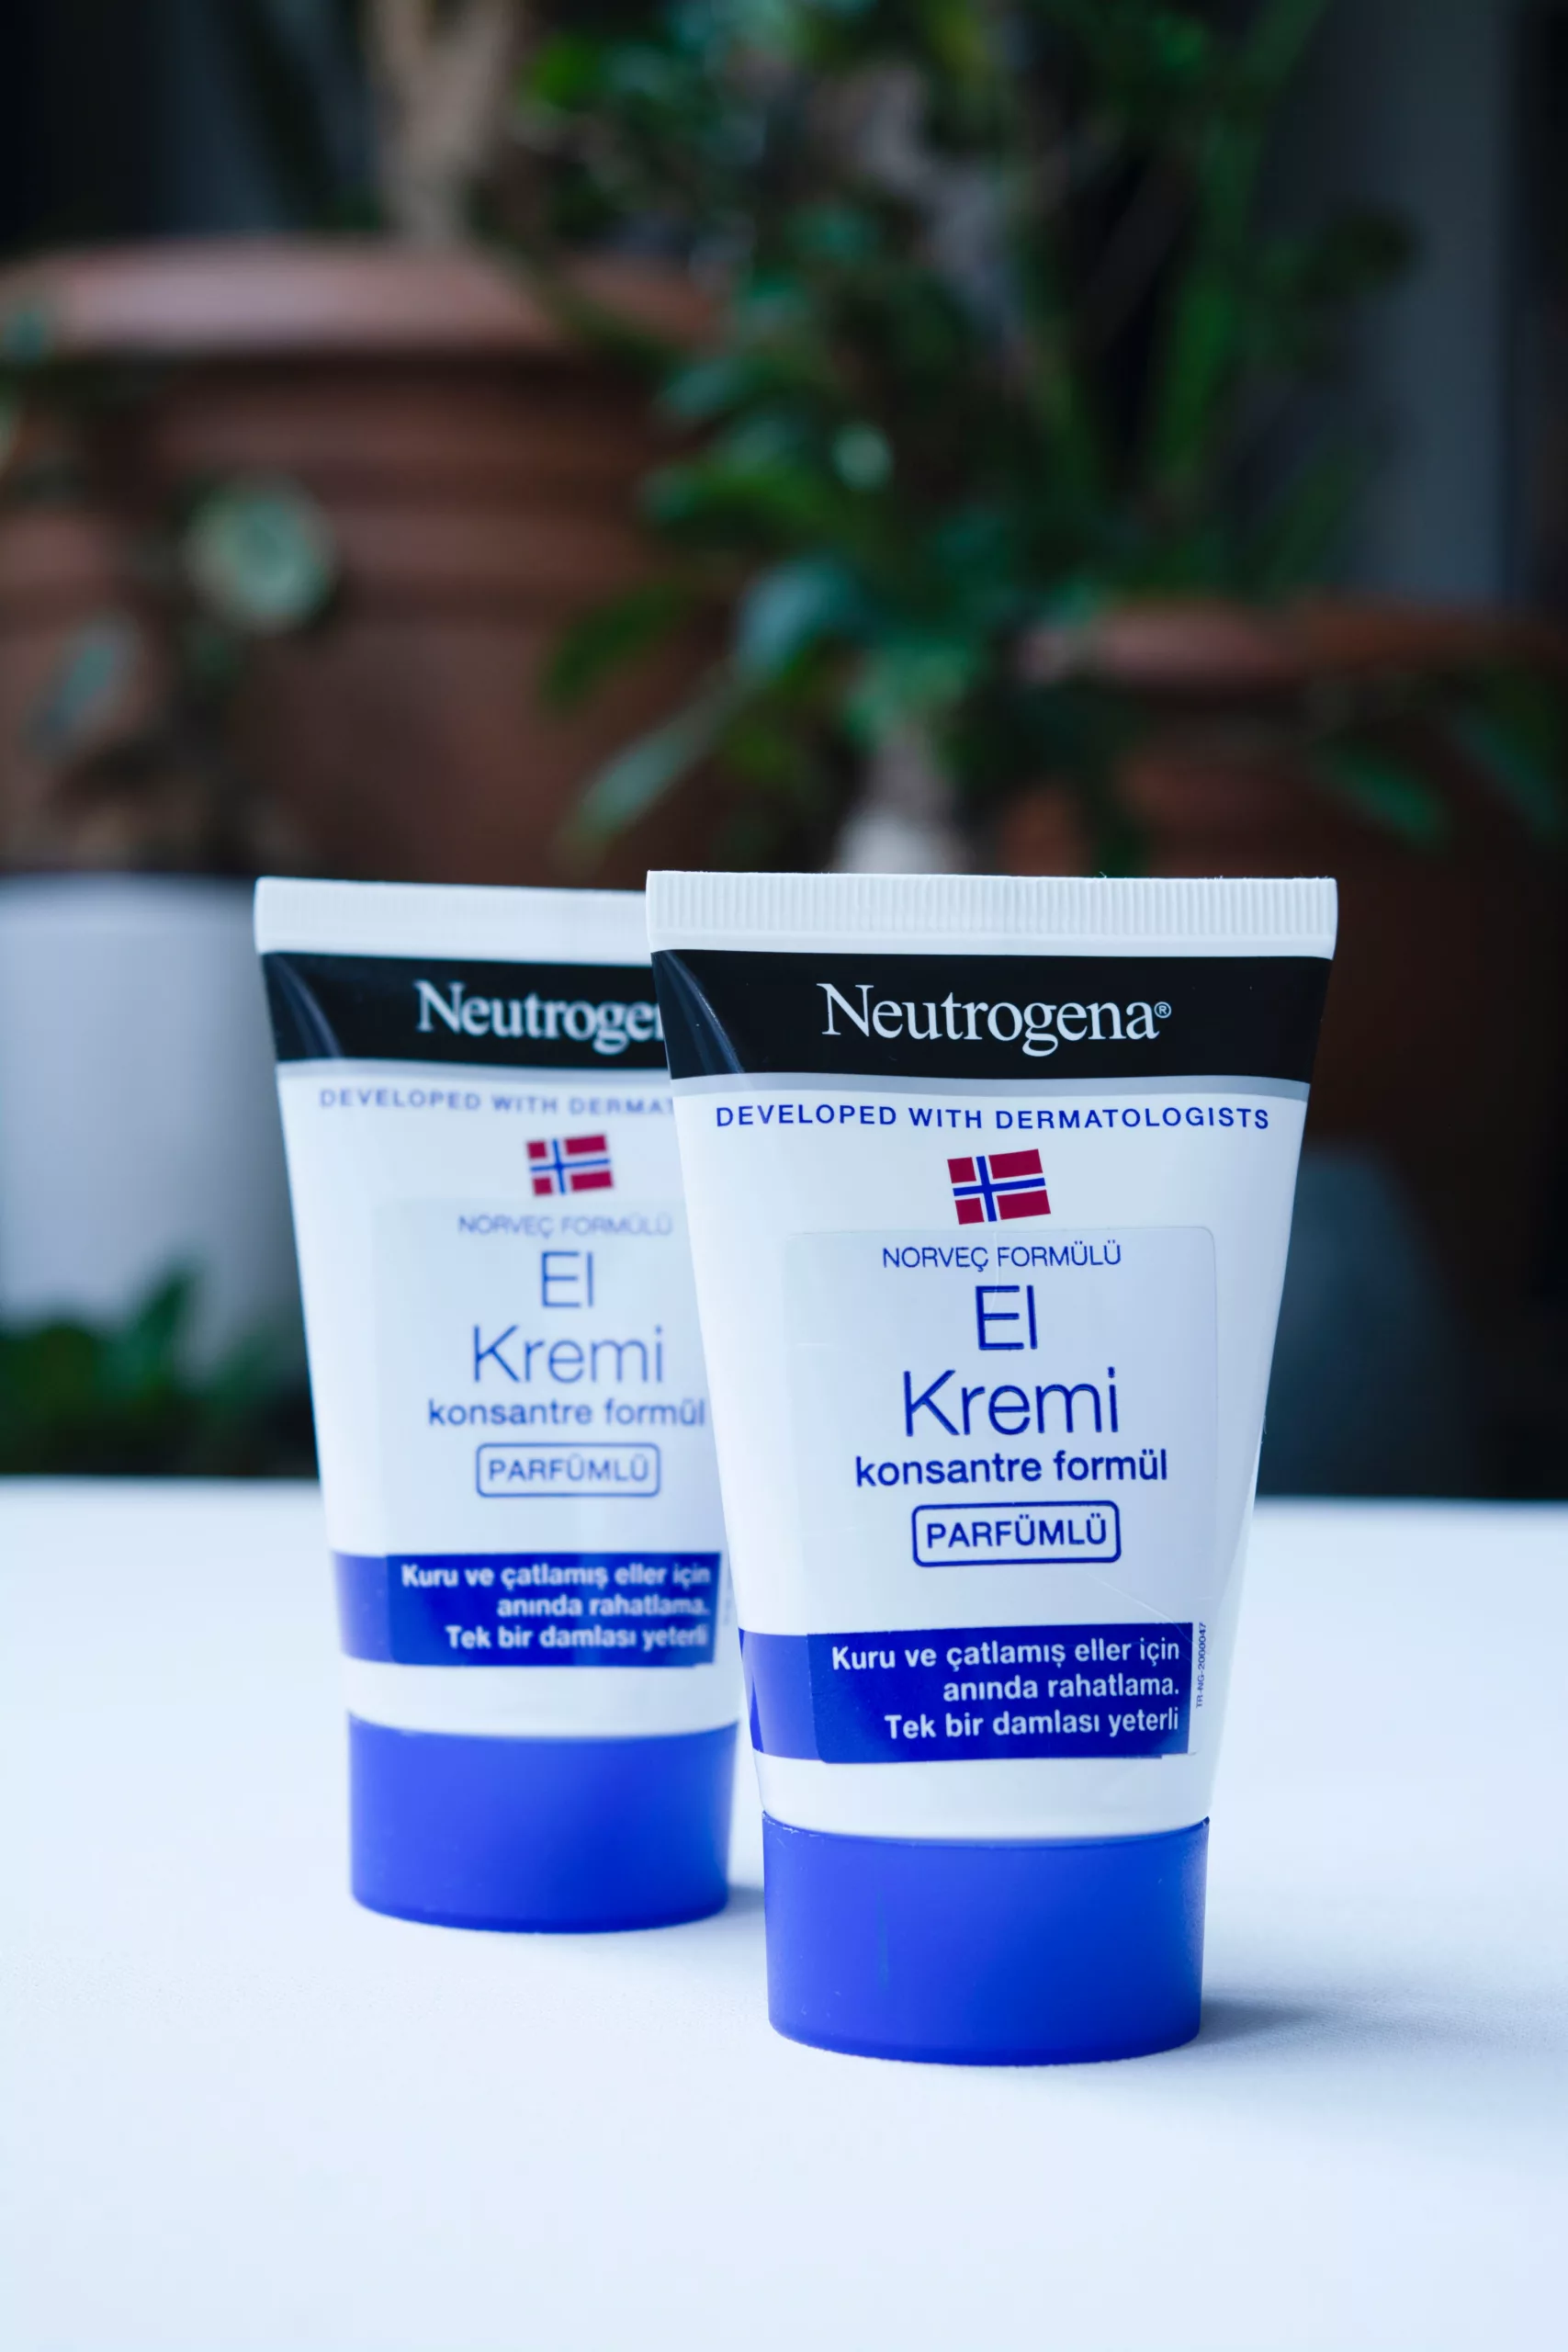 Is Neutrogena Cruelty-Free? Unveiling the Truth Behind the Brand